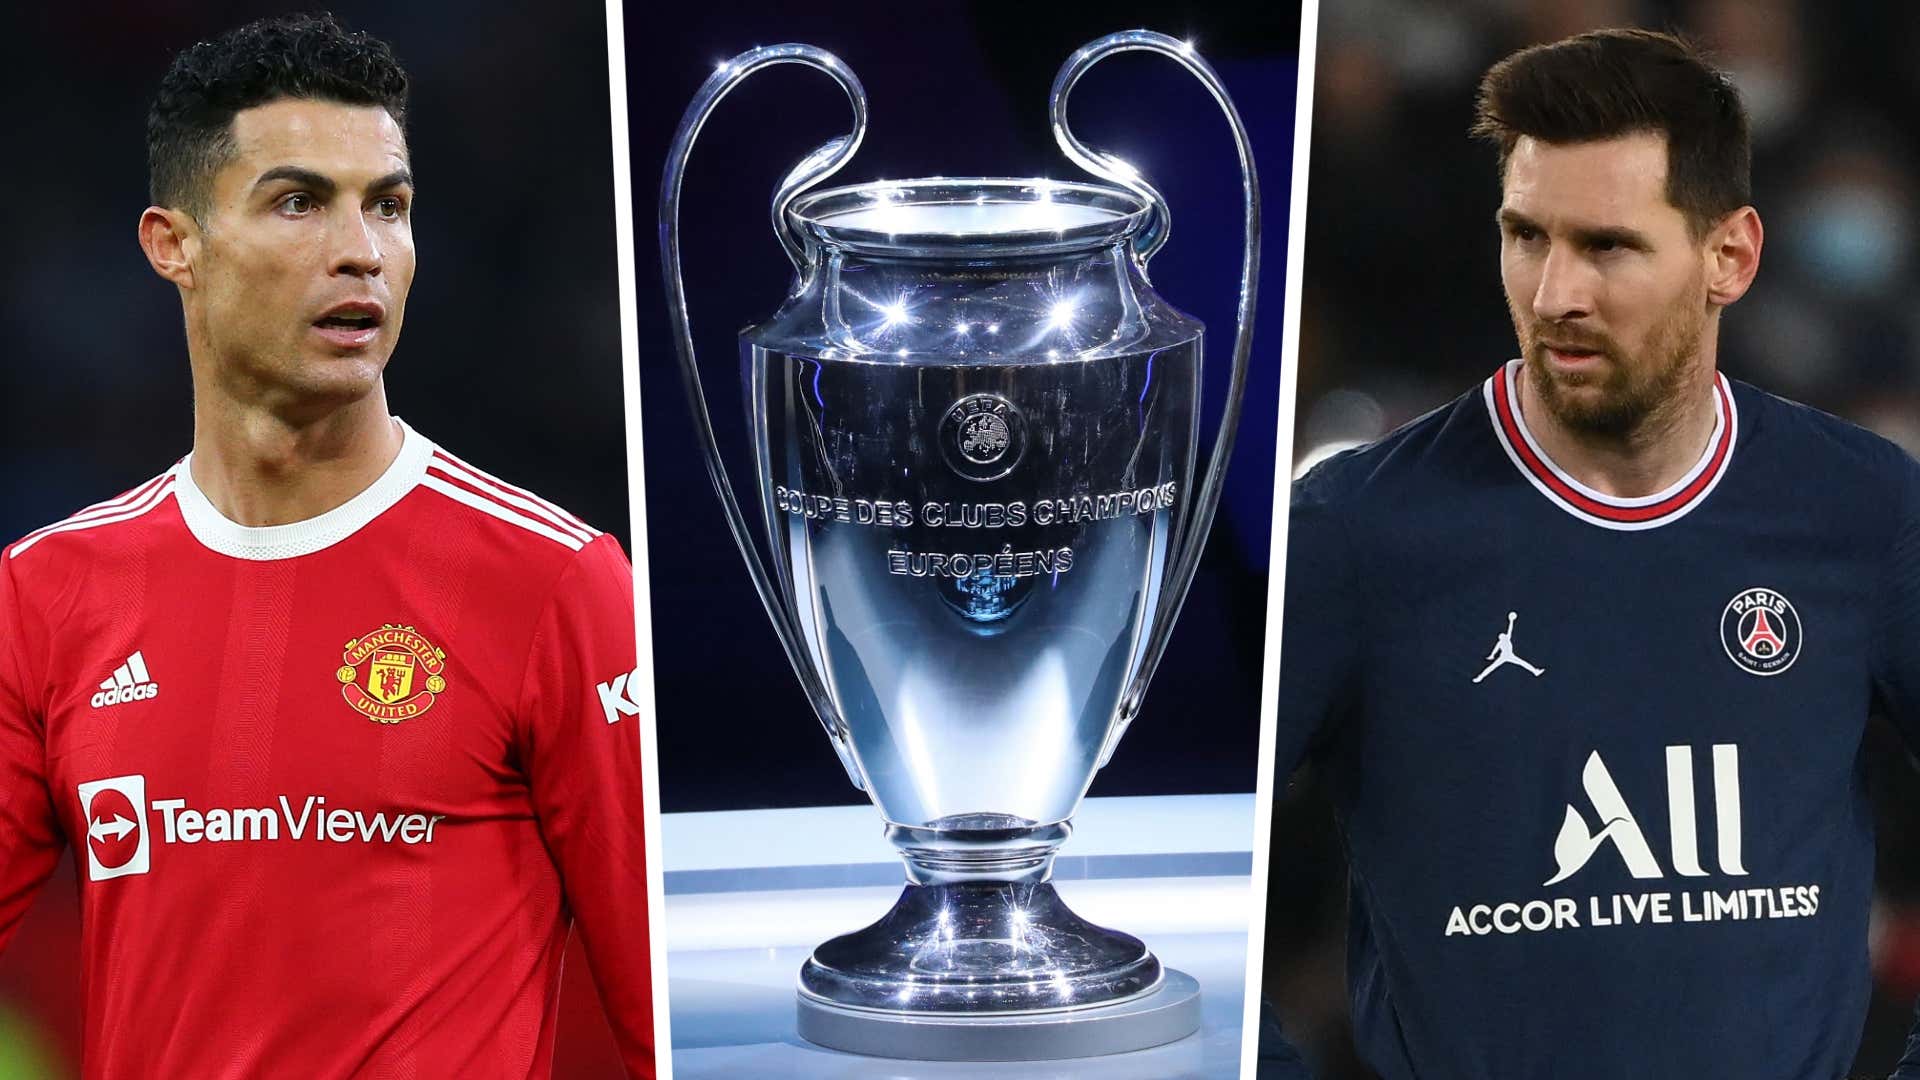 Champions League last 16 draw: Man Utd face PSG, Liverpool land Salzburg and Chelsea tackle Lille